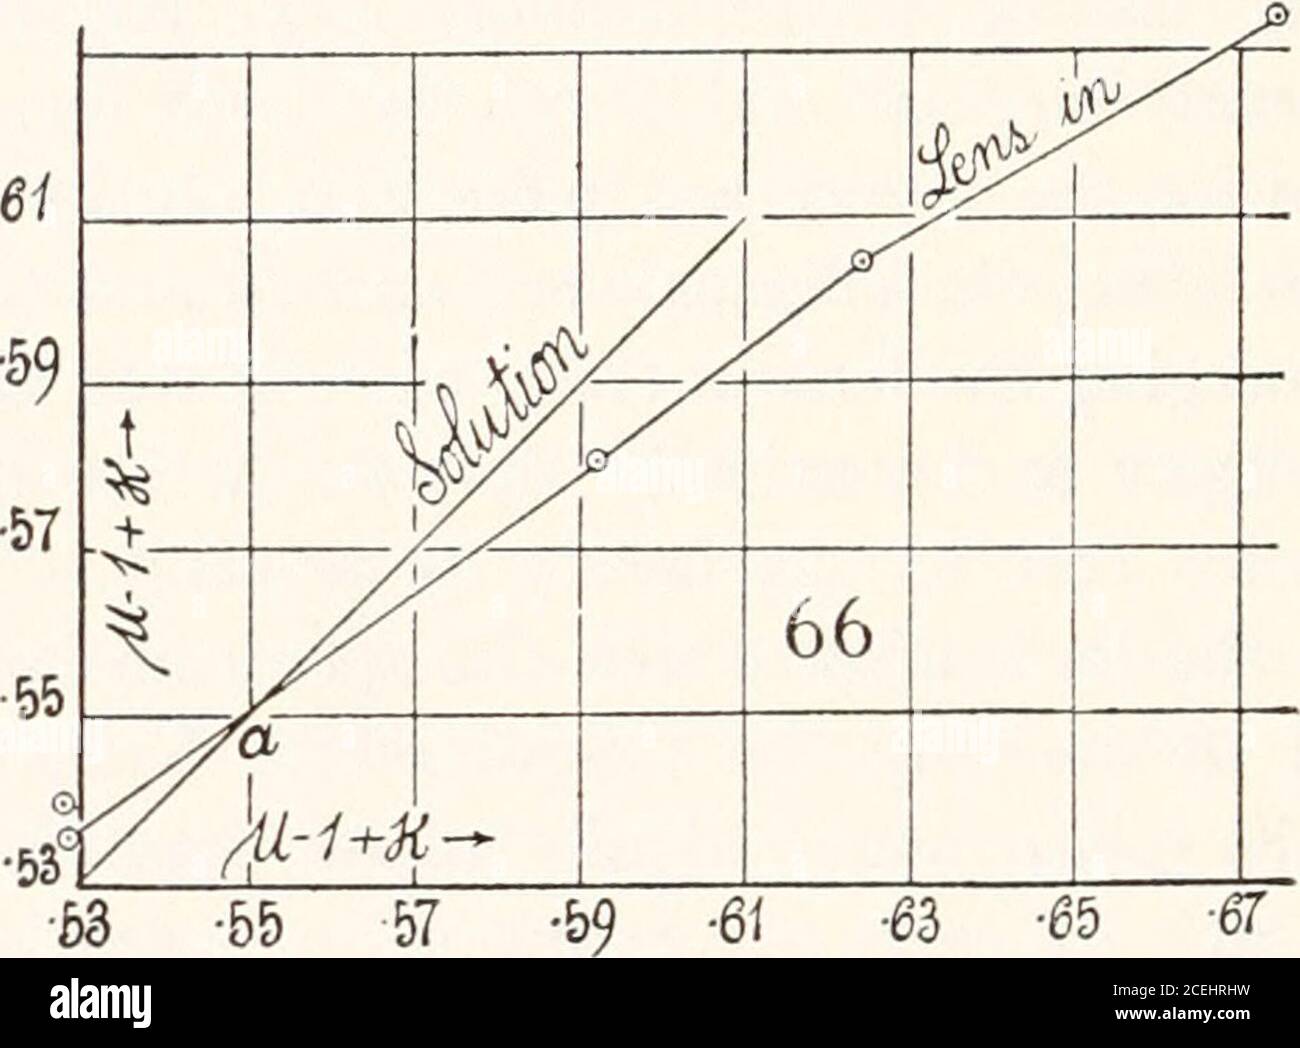 Carnegie Institution of Washington publication. 63 -55 structed graphically for solution as and for submergedglass as ordinate), the results (figs. and 66) show a very trendand show